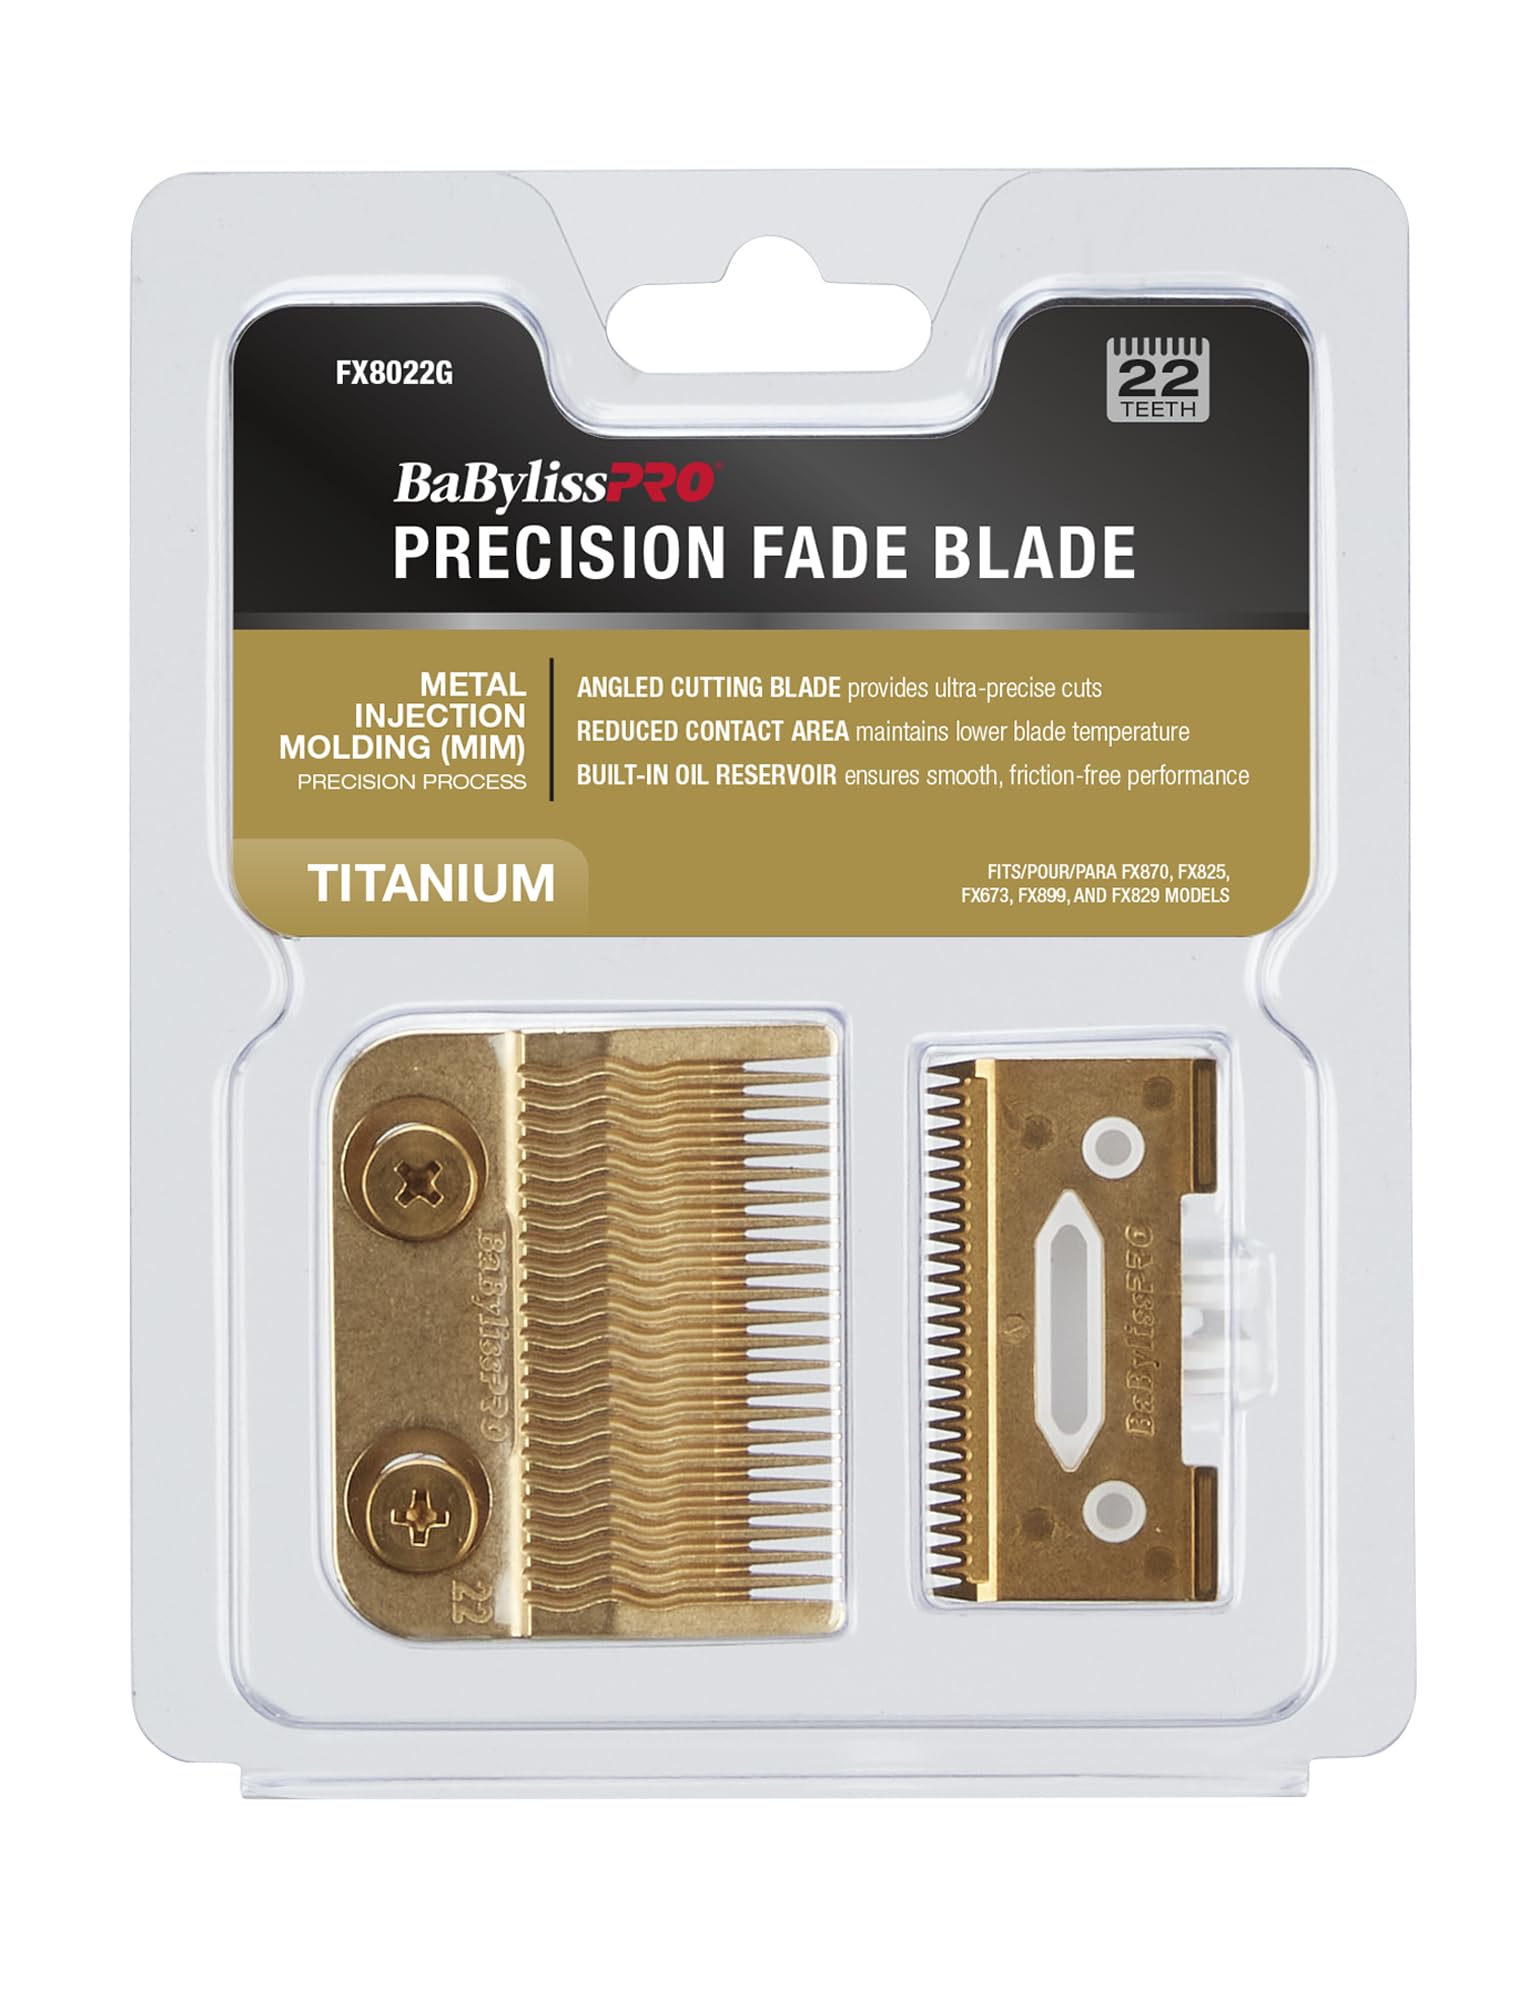 BaBylissPRO Metal Injection Molded (MIM) Fade Blades for Clippers - FX829,FX899, FX890, FX870, FX825, FX673